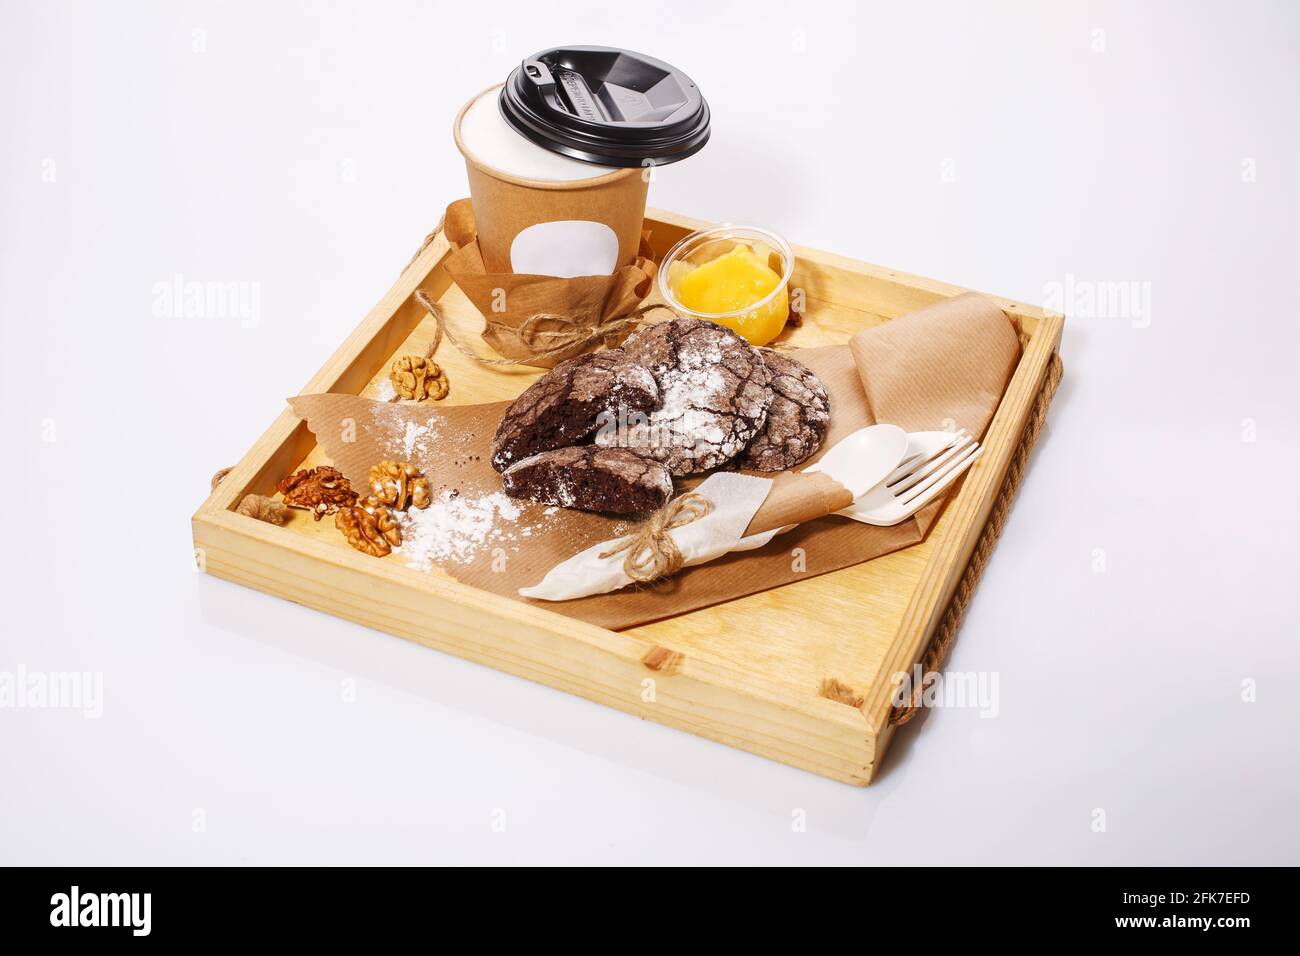 Chocolate cookies lie on kraft paper and coffee on a wooden rustic tray on a white background. Paper cup and disposable tableware made of eco-friendly Stock Photo